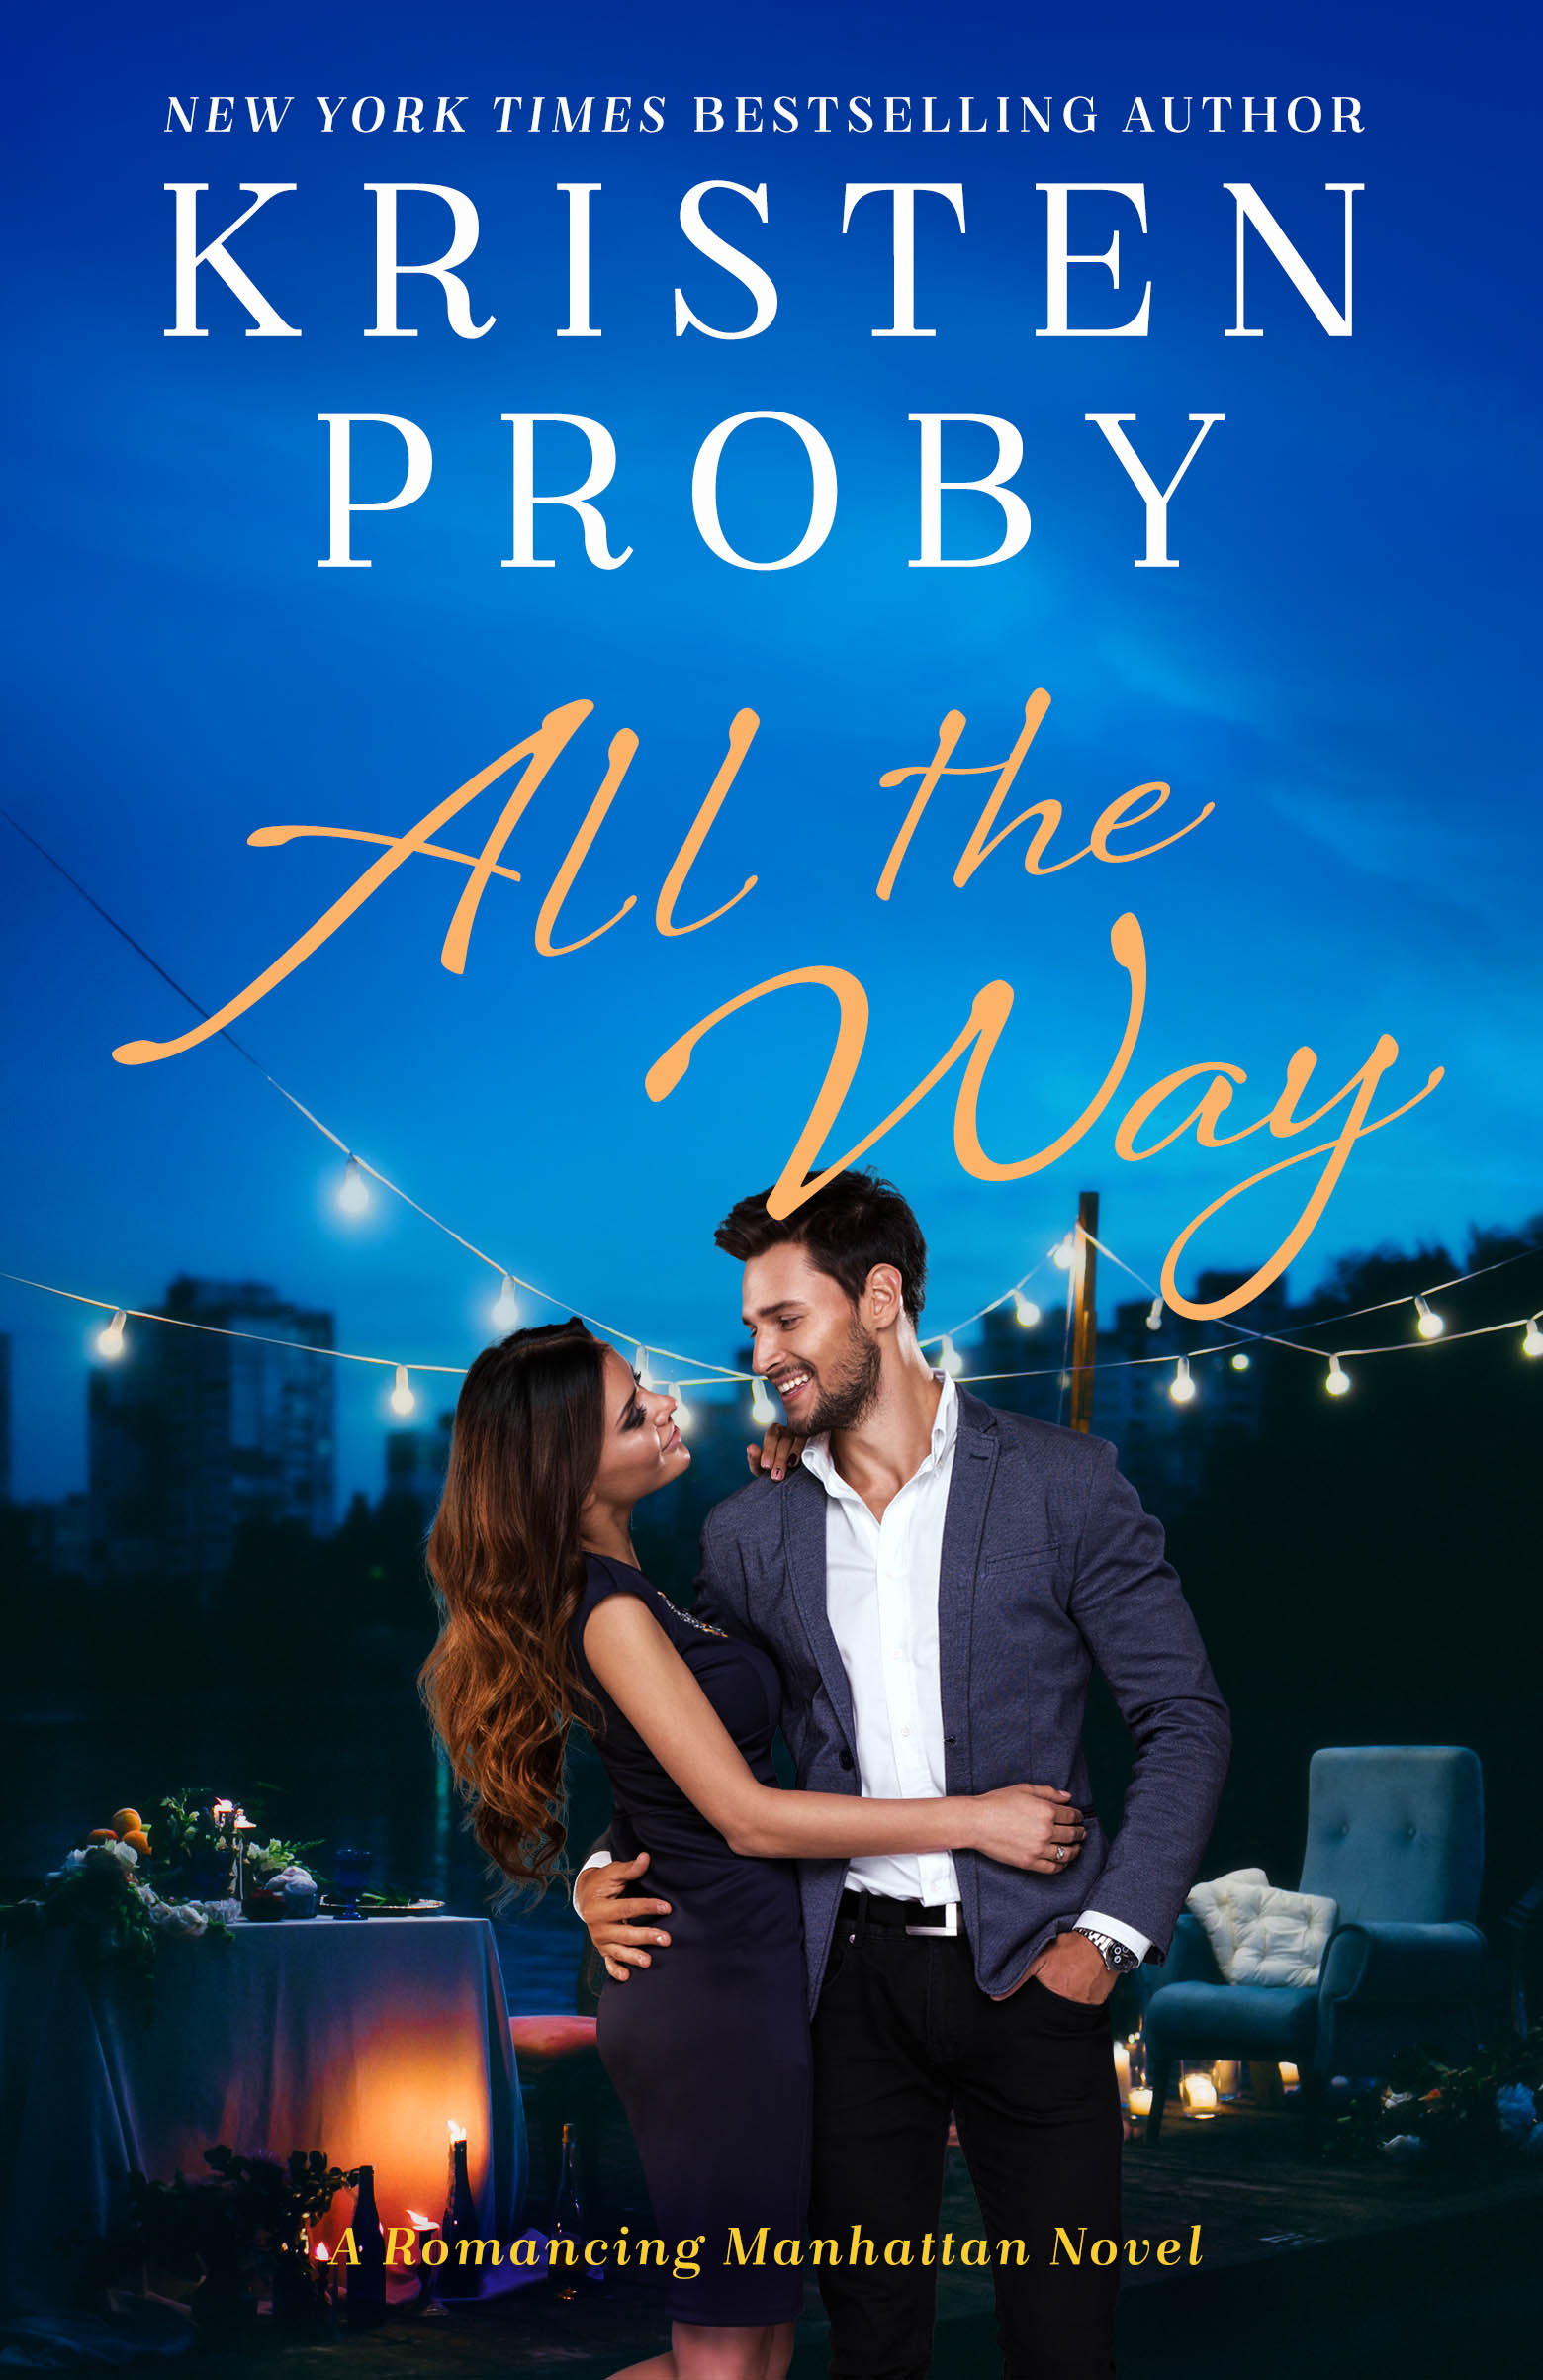 All The Way by Kristen Proby [Review]